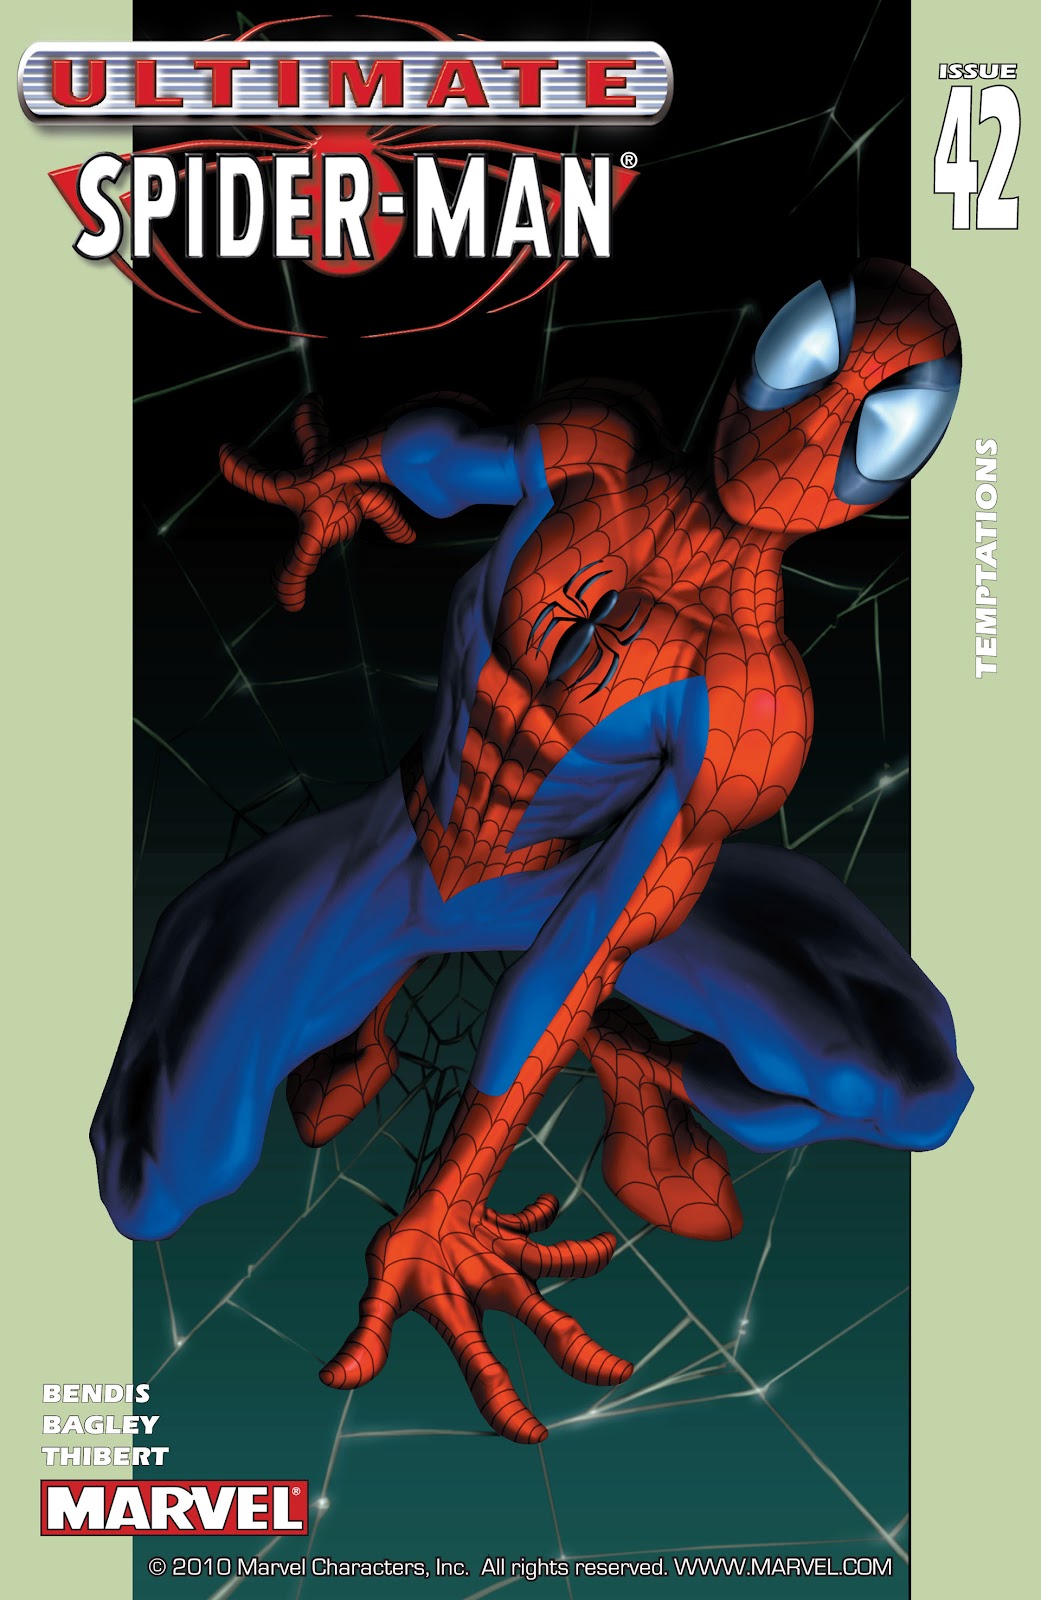 Ultimate Spider Man 2000 Issue 42 | Read Ultimate Spider Man 2000 Issue 42  comic online in high quality. Read Full Comic online for free - Read comics  online in high quality .| READ COMIC ONLINE